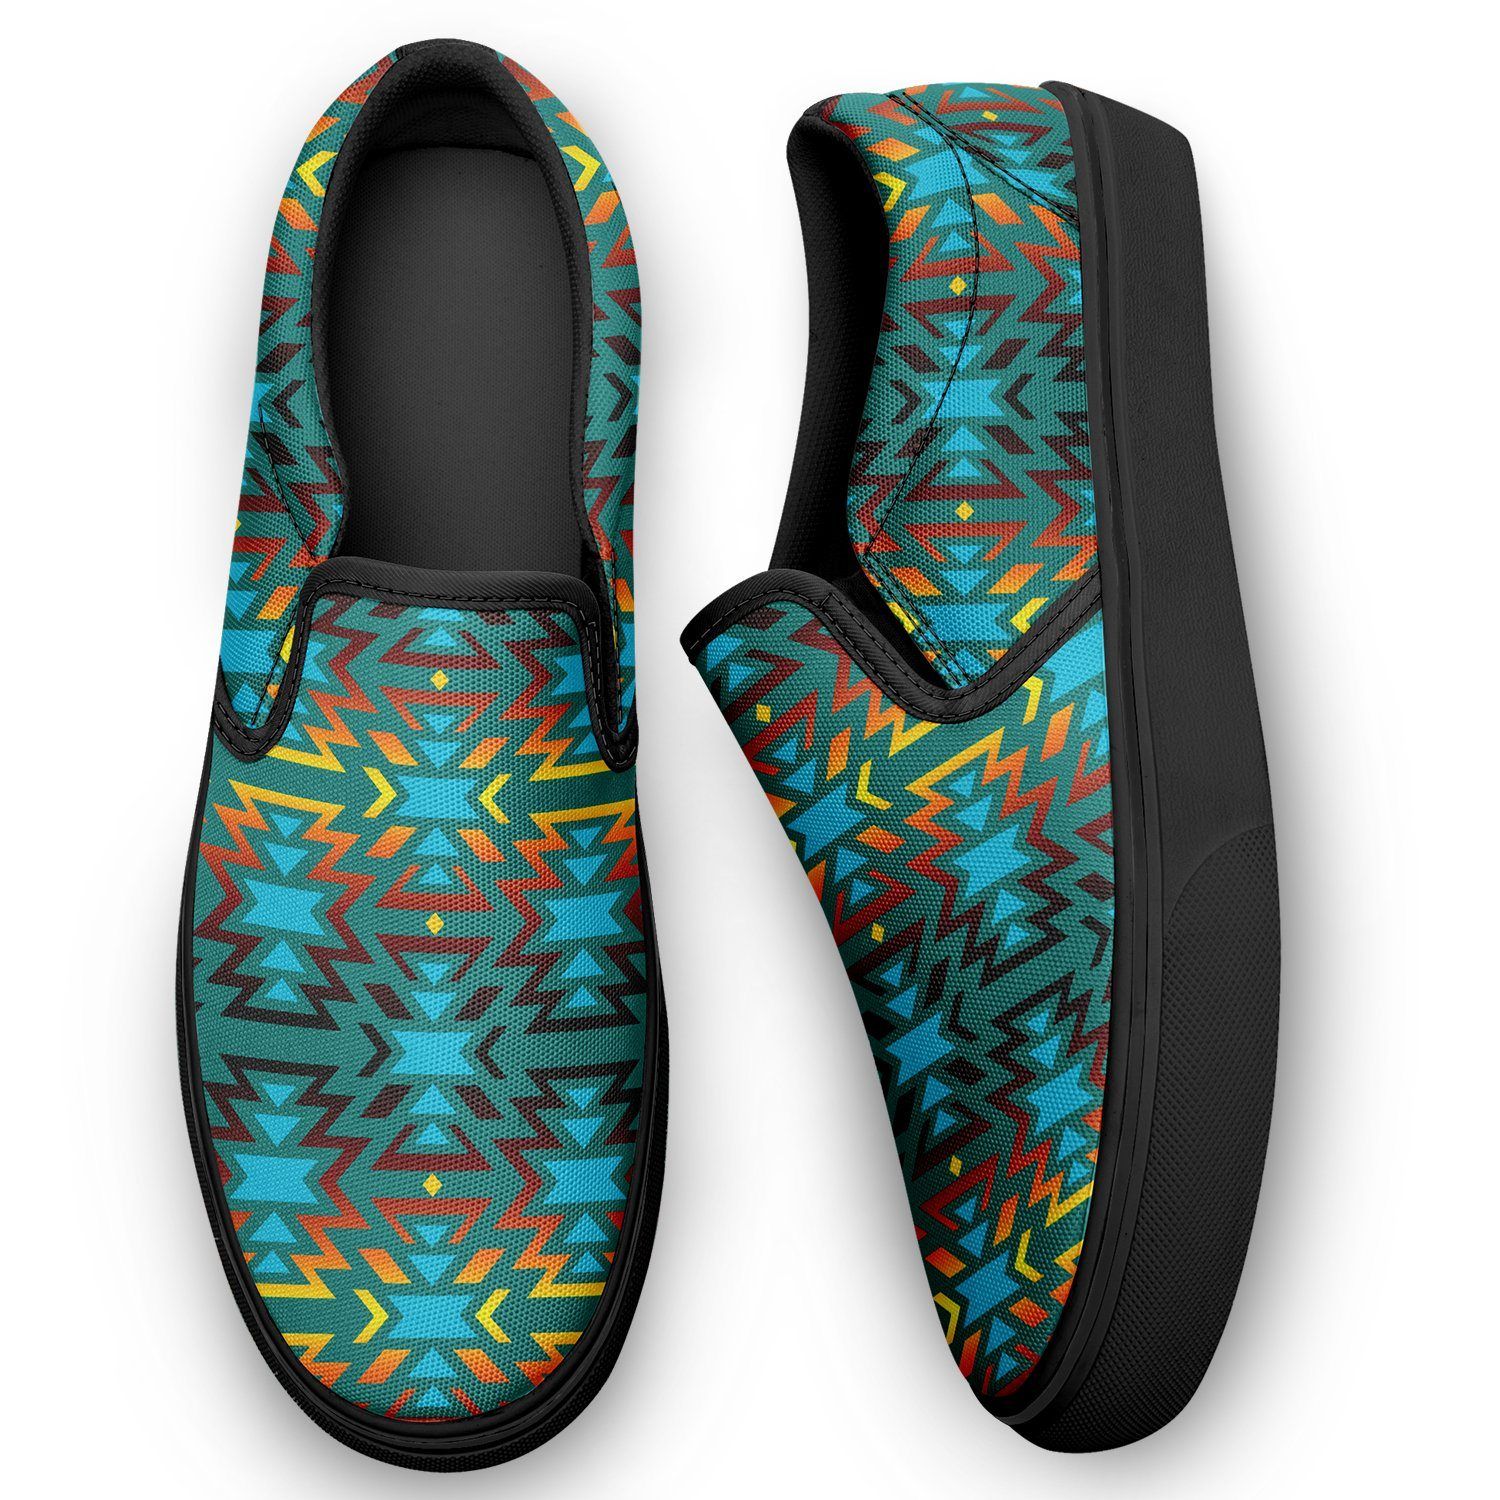 Fire Colors and Turquoise Teal Otoyimm Kid's Canvas Slip On Shoes 49 Dzine 